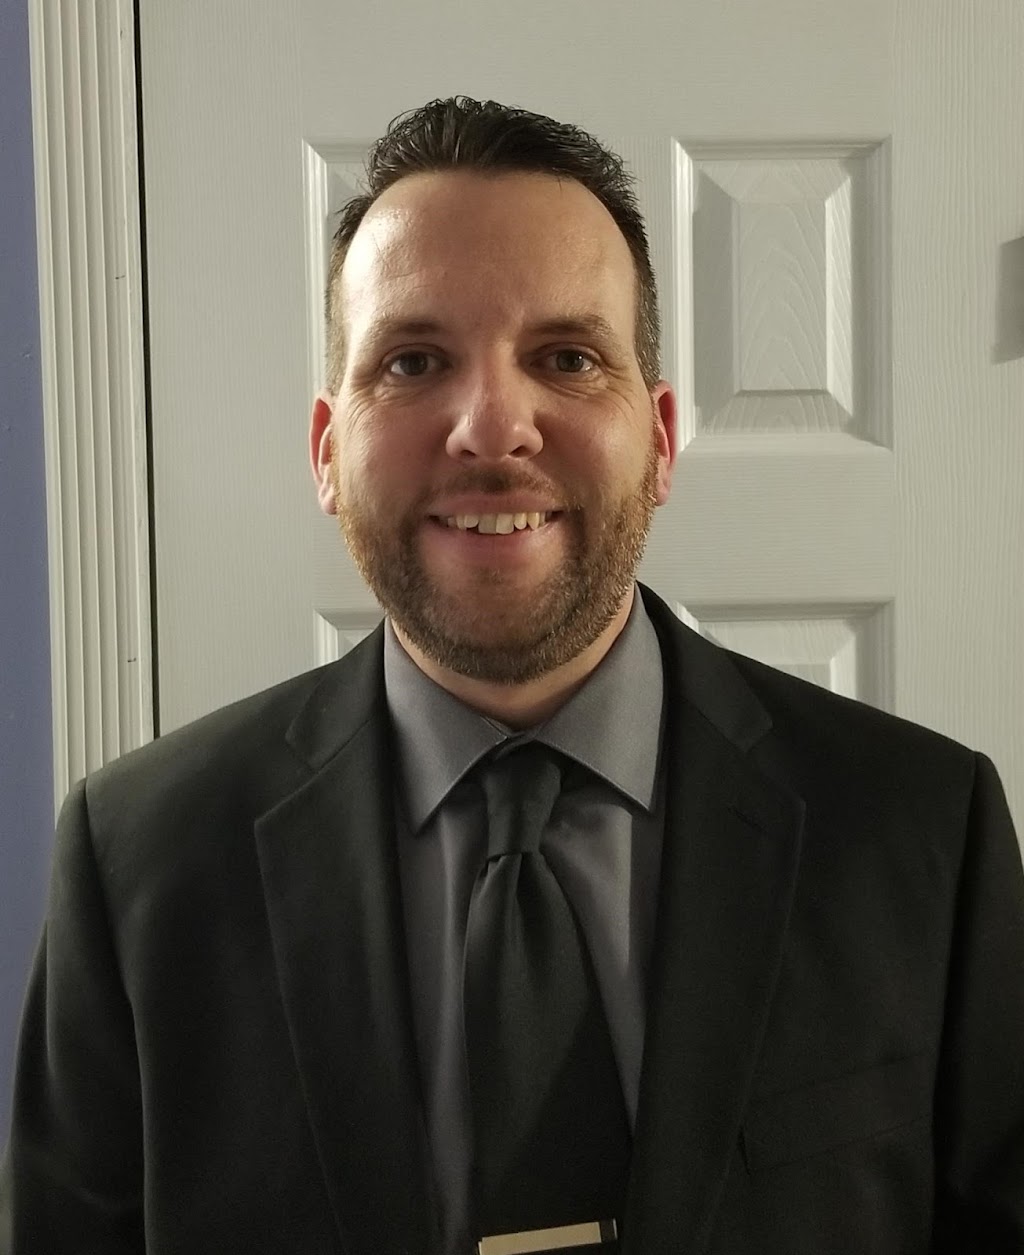 Tyler Cowle, AMPC - Mortgage Agent - Dominion Lending Centres | point of interest | 111 Eastlawn St, Oshawa, ON L1H 7J9, Canada | 9054405392 OR +1 905-440-5392